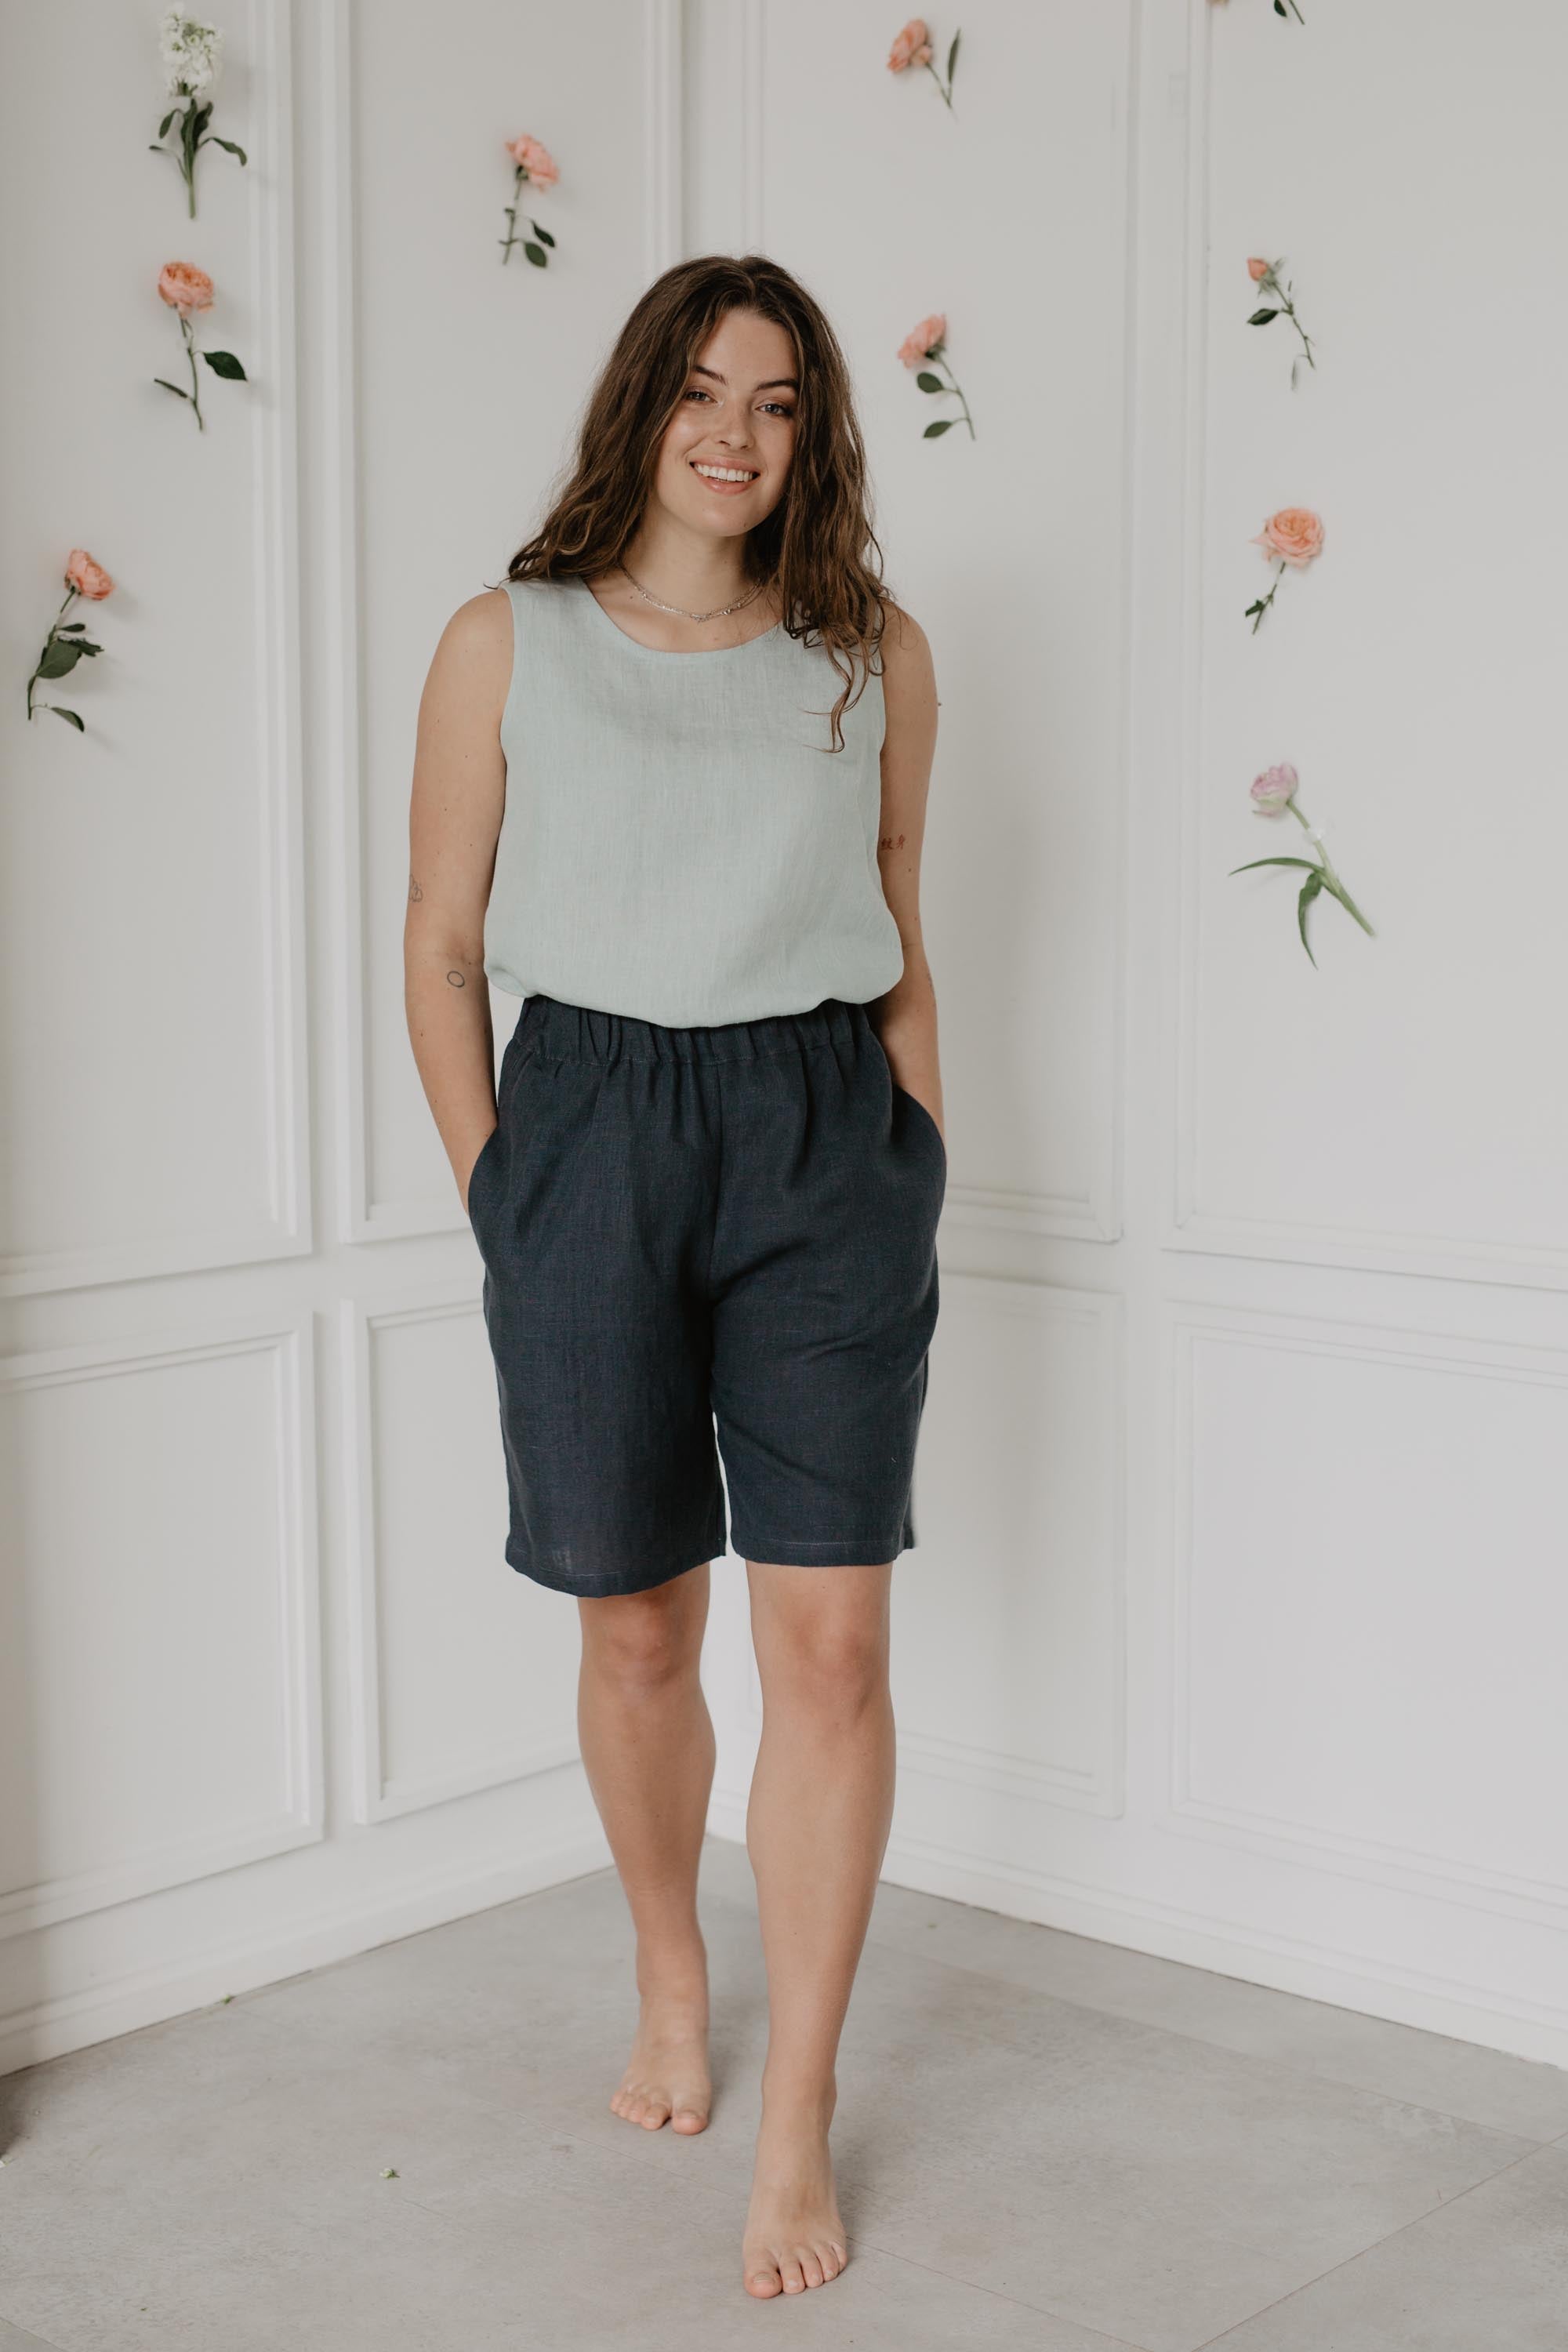 Woman Wearing Dark Long Linen Shorts And Sage Green Linen Top In A Light Room